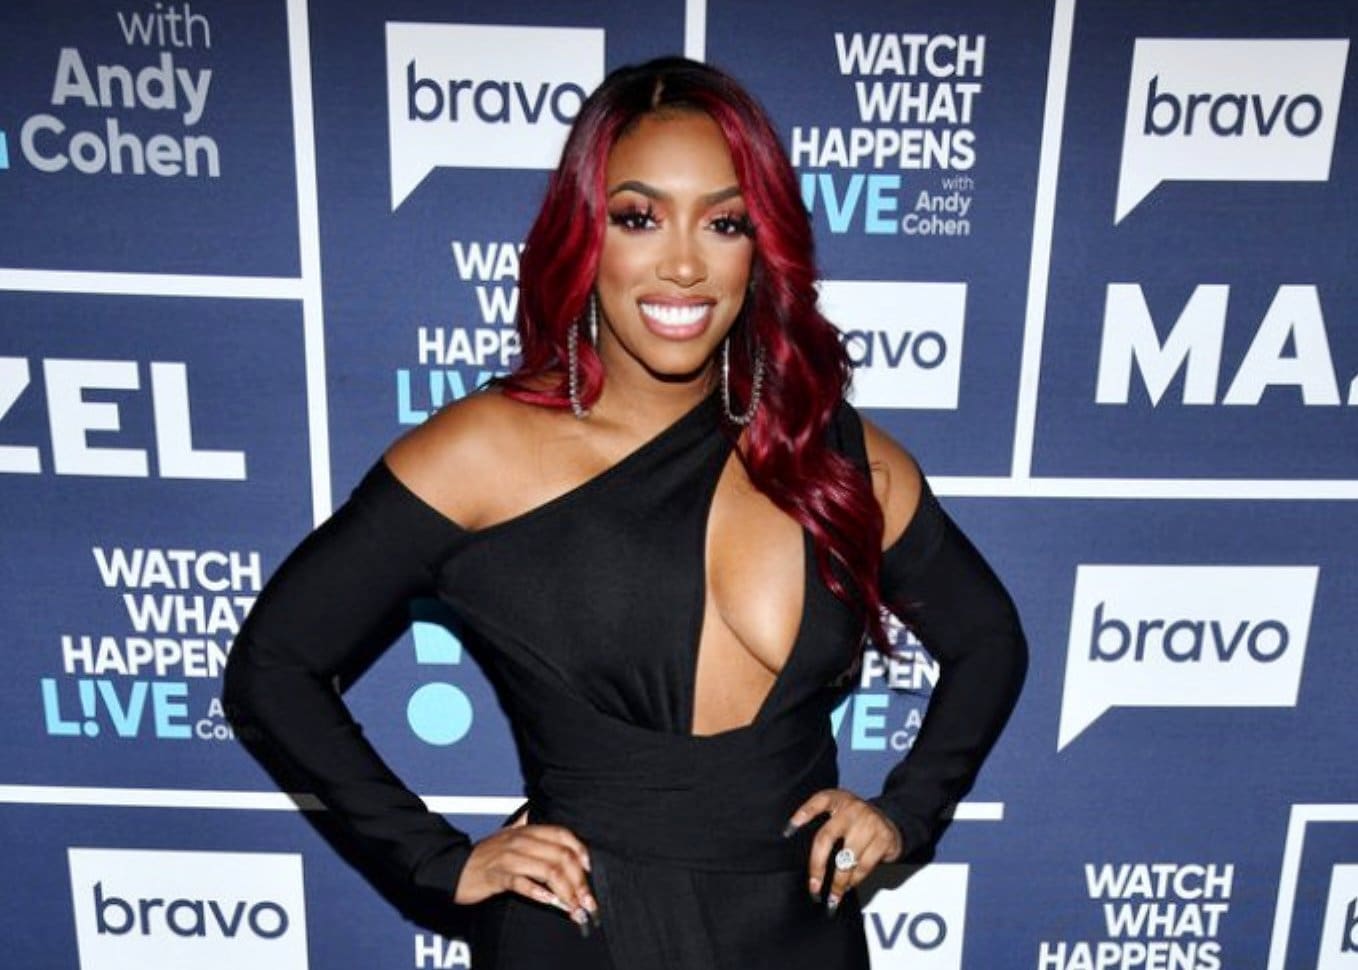 Porsha Williams Cuts Her Hair Short And Shocks Fans - See Her New Look